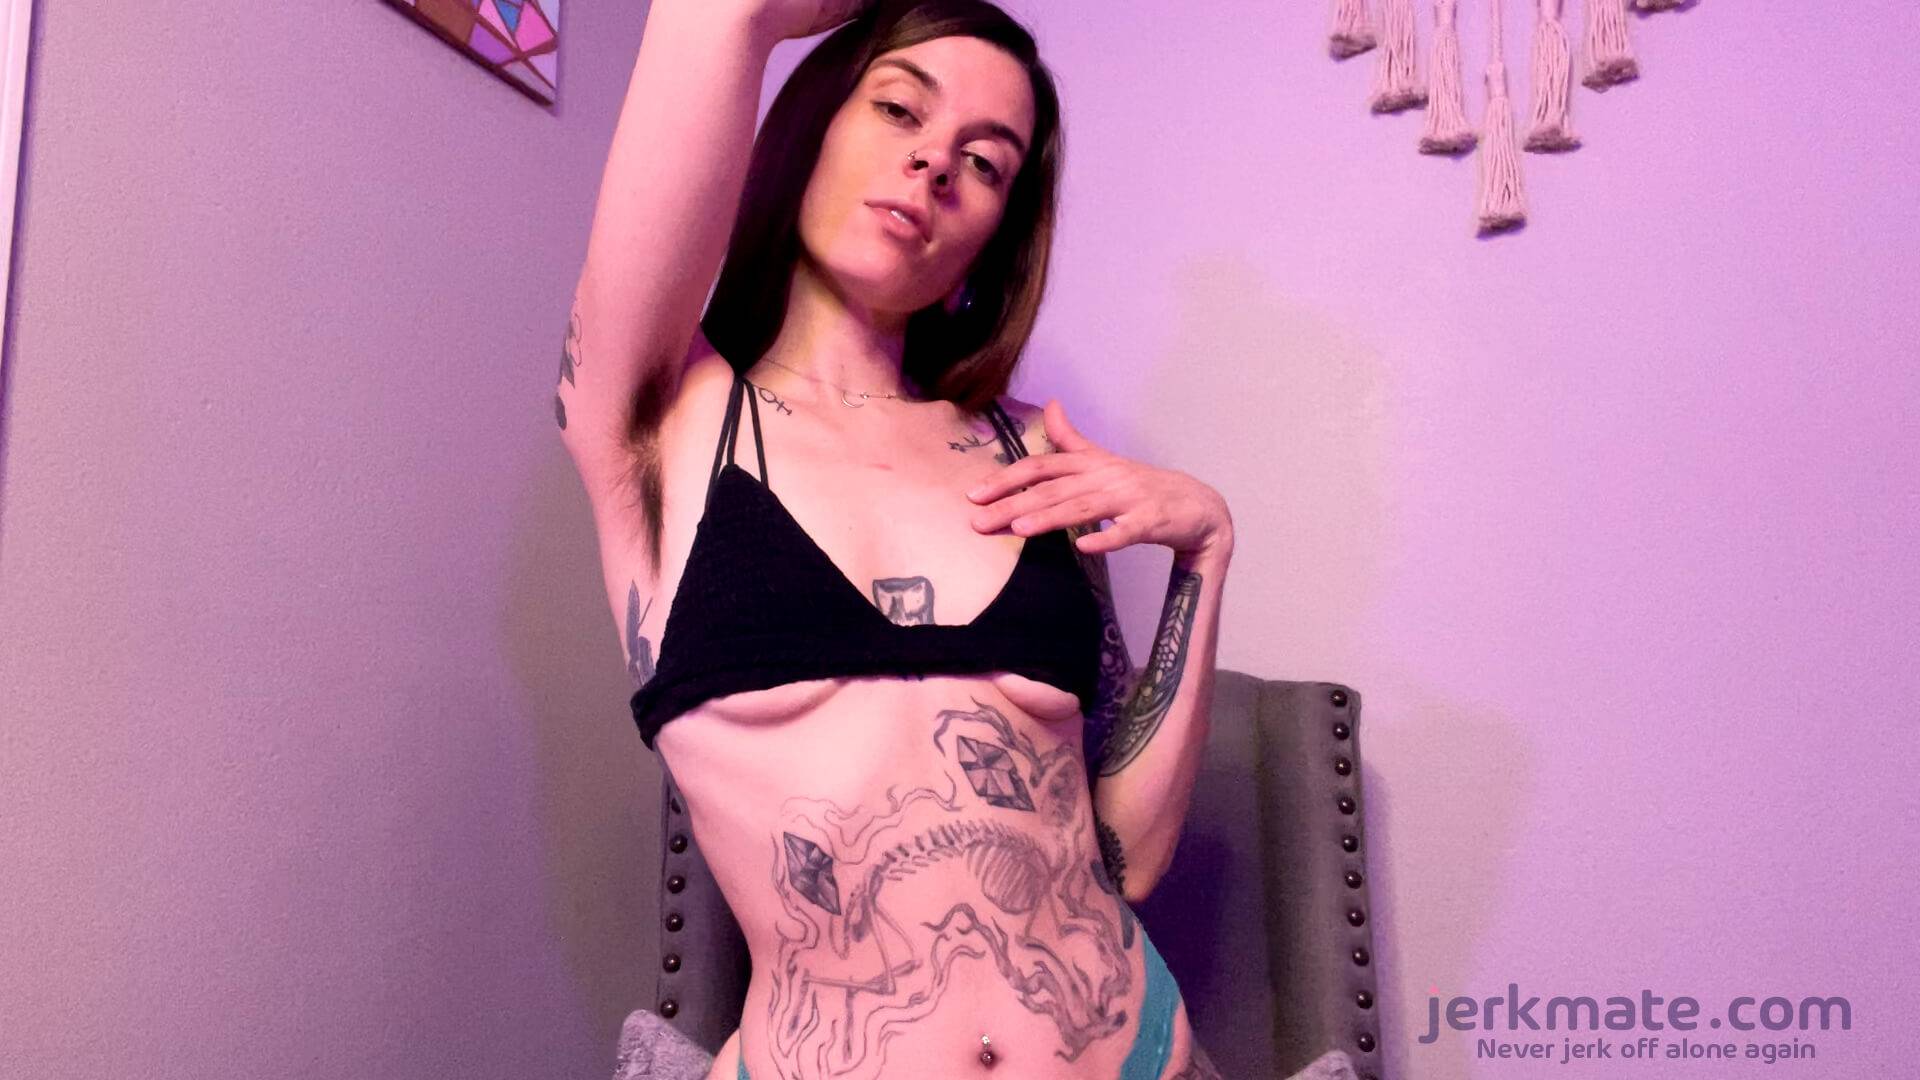 Need yourself a hot camgirl to spice up your evening? Look no further, Valkyree_Jainex is a self-proclaimed hairy femdom goddess. You'll never get bored of her live cam shows.